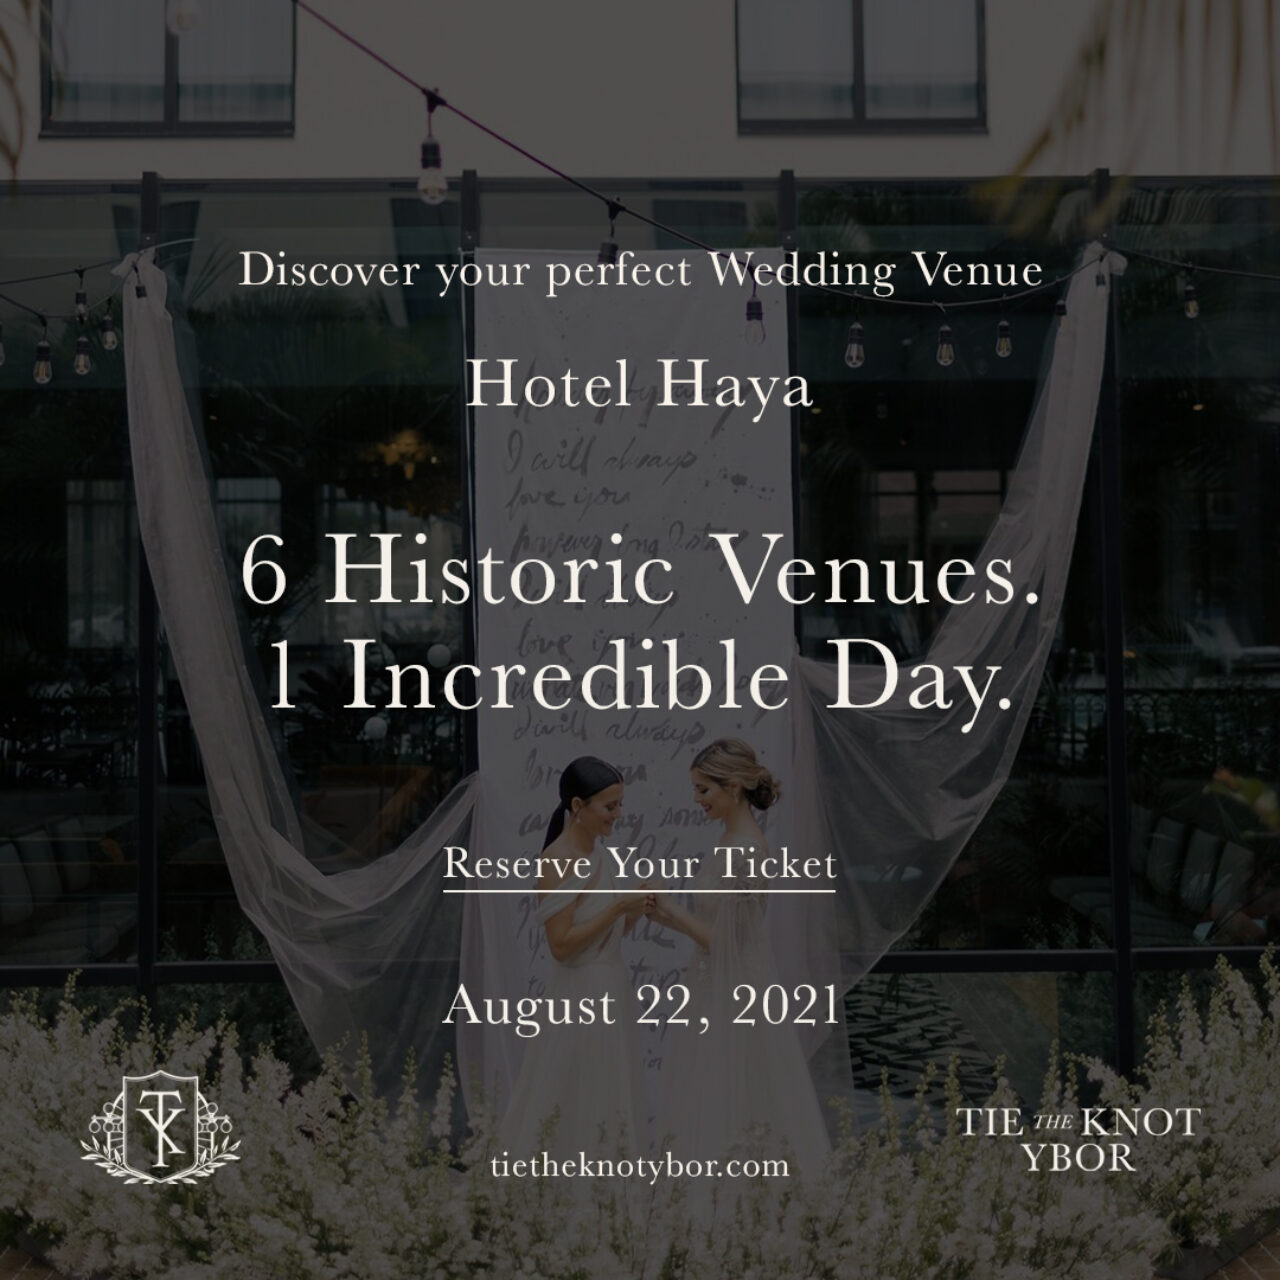 Hotel Haya's Discover Your Perfect Wedding Venue for the Knot Ybor banner